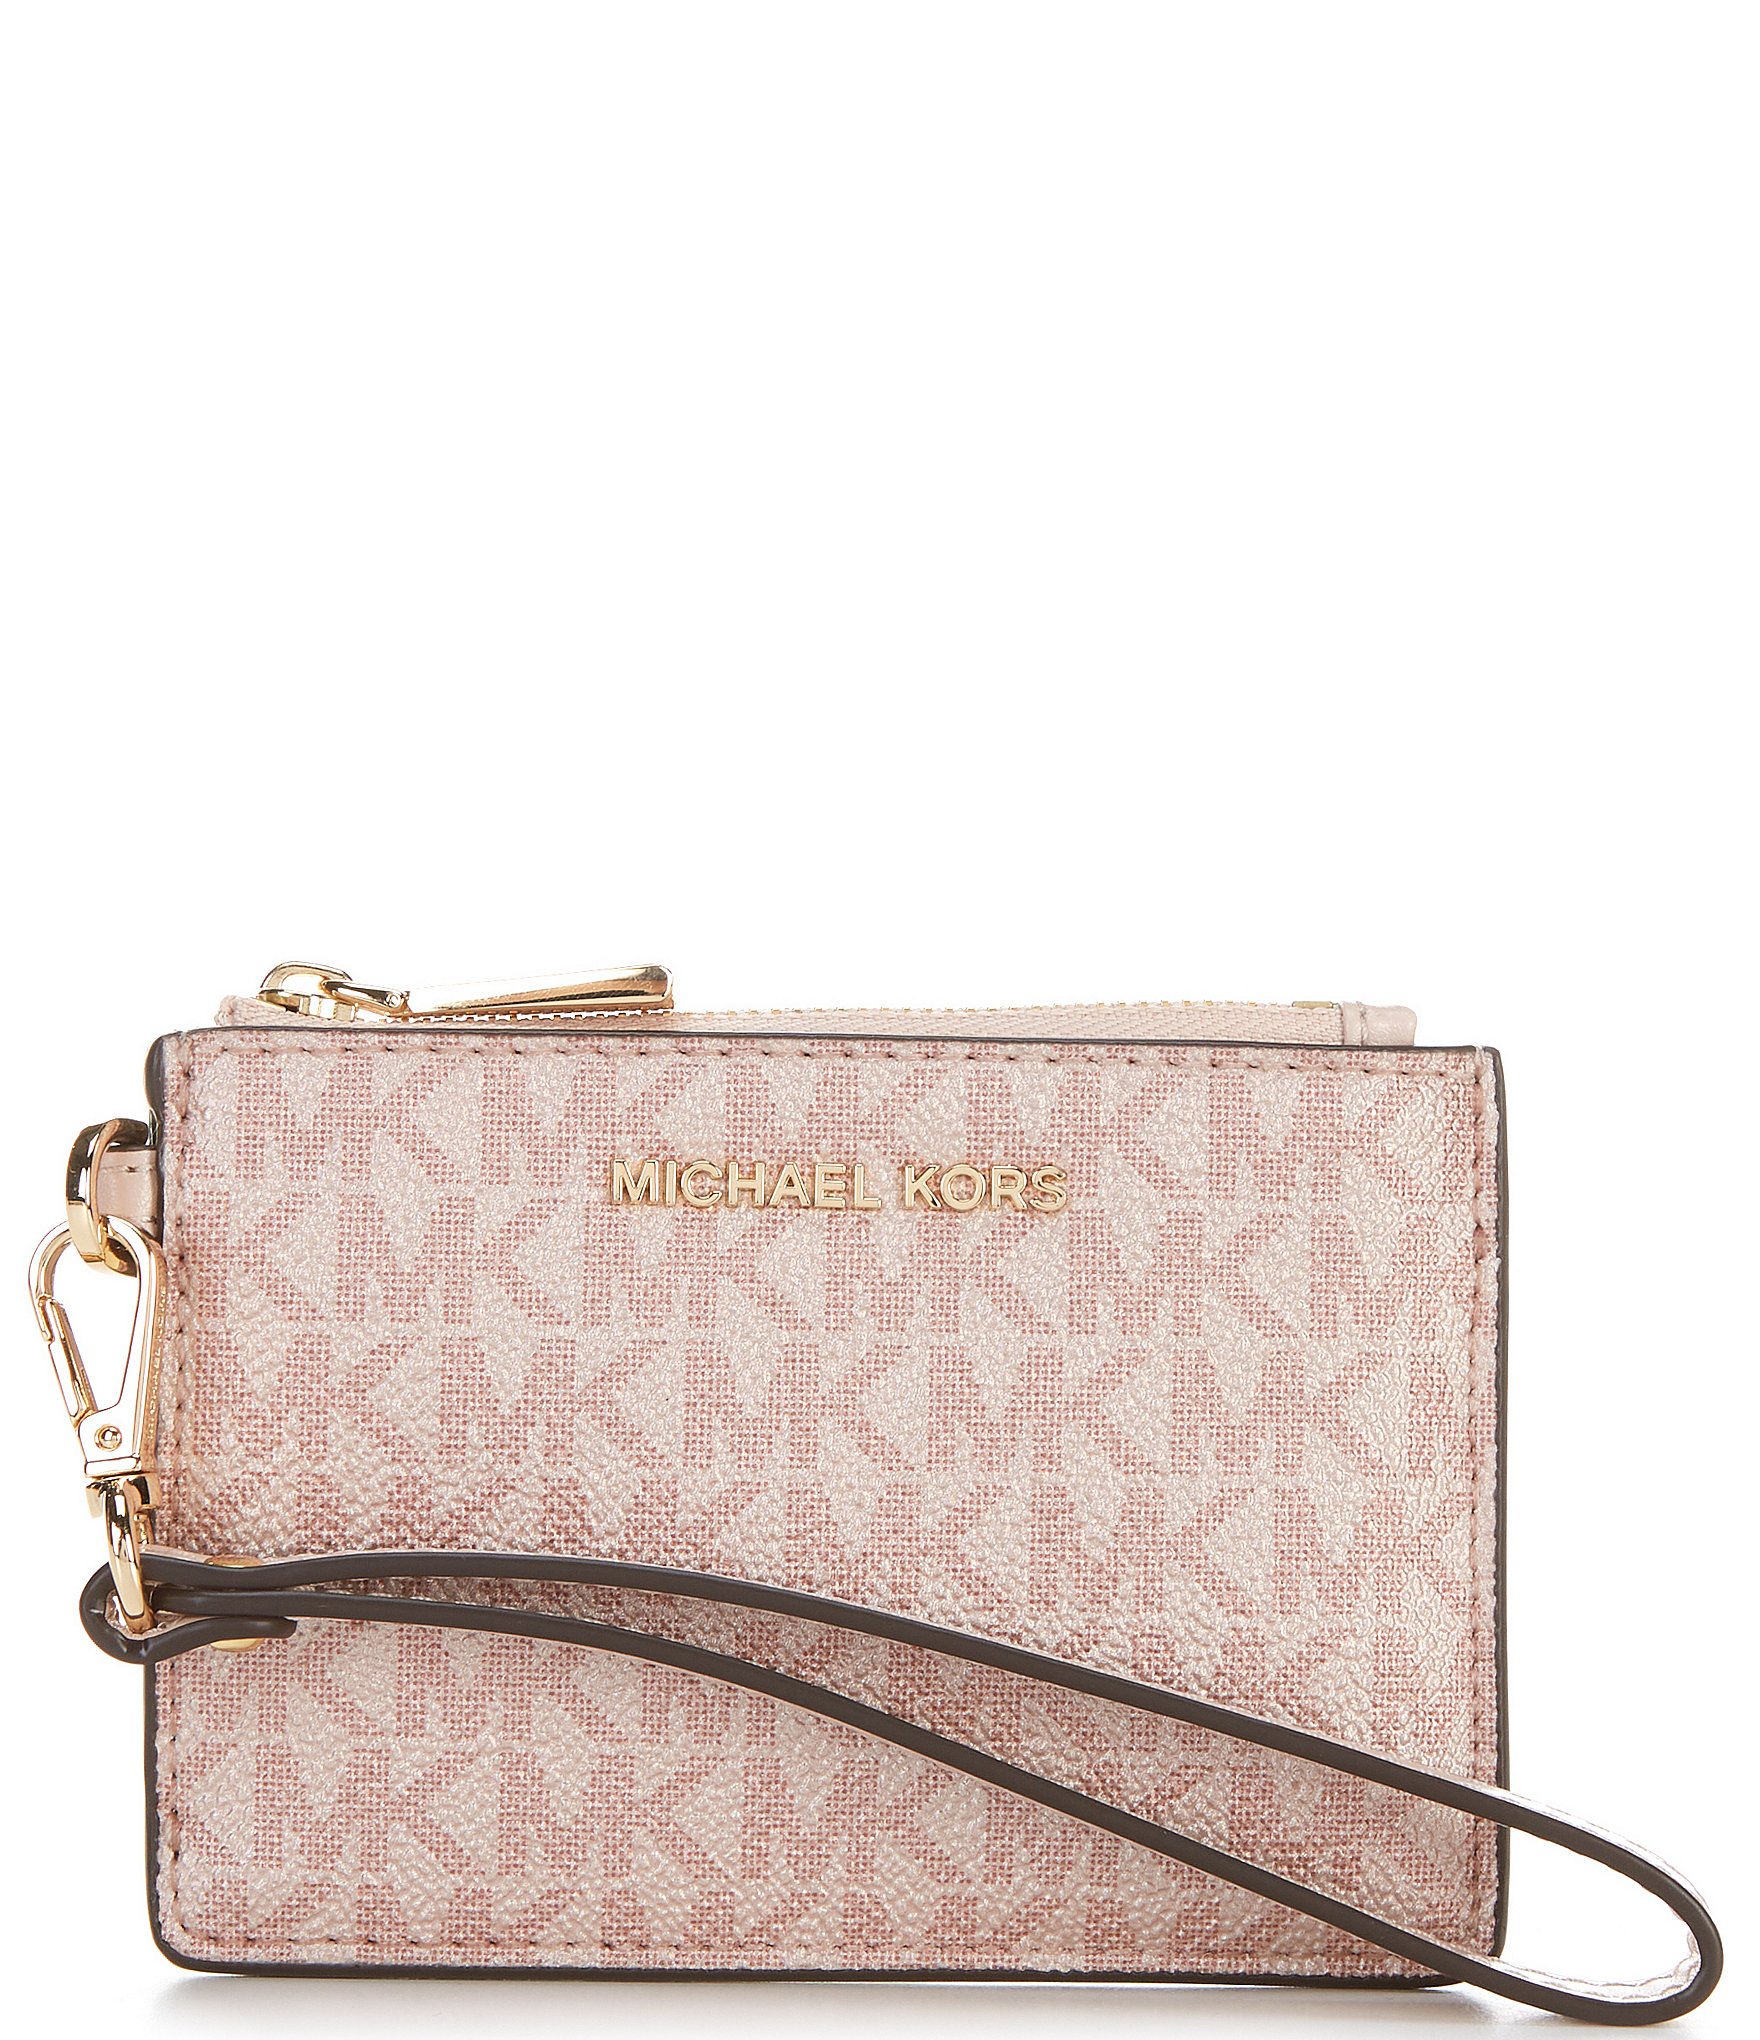 Michael Kors Receive a FREE MK coin purse with any Michael Kors watch or  jewelry purchase of $195 or more. Offer applies at checkout. Offer valid  3/2/22-3/9/22. - Macy's